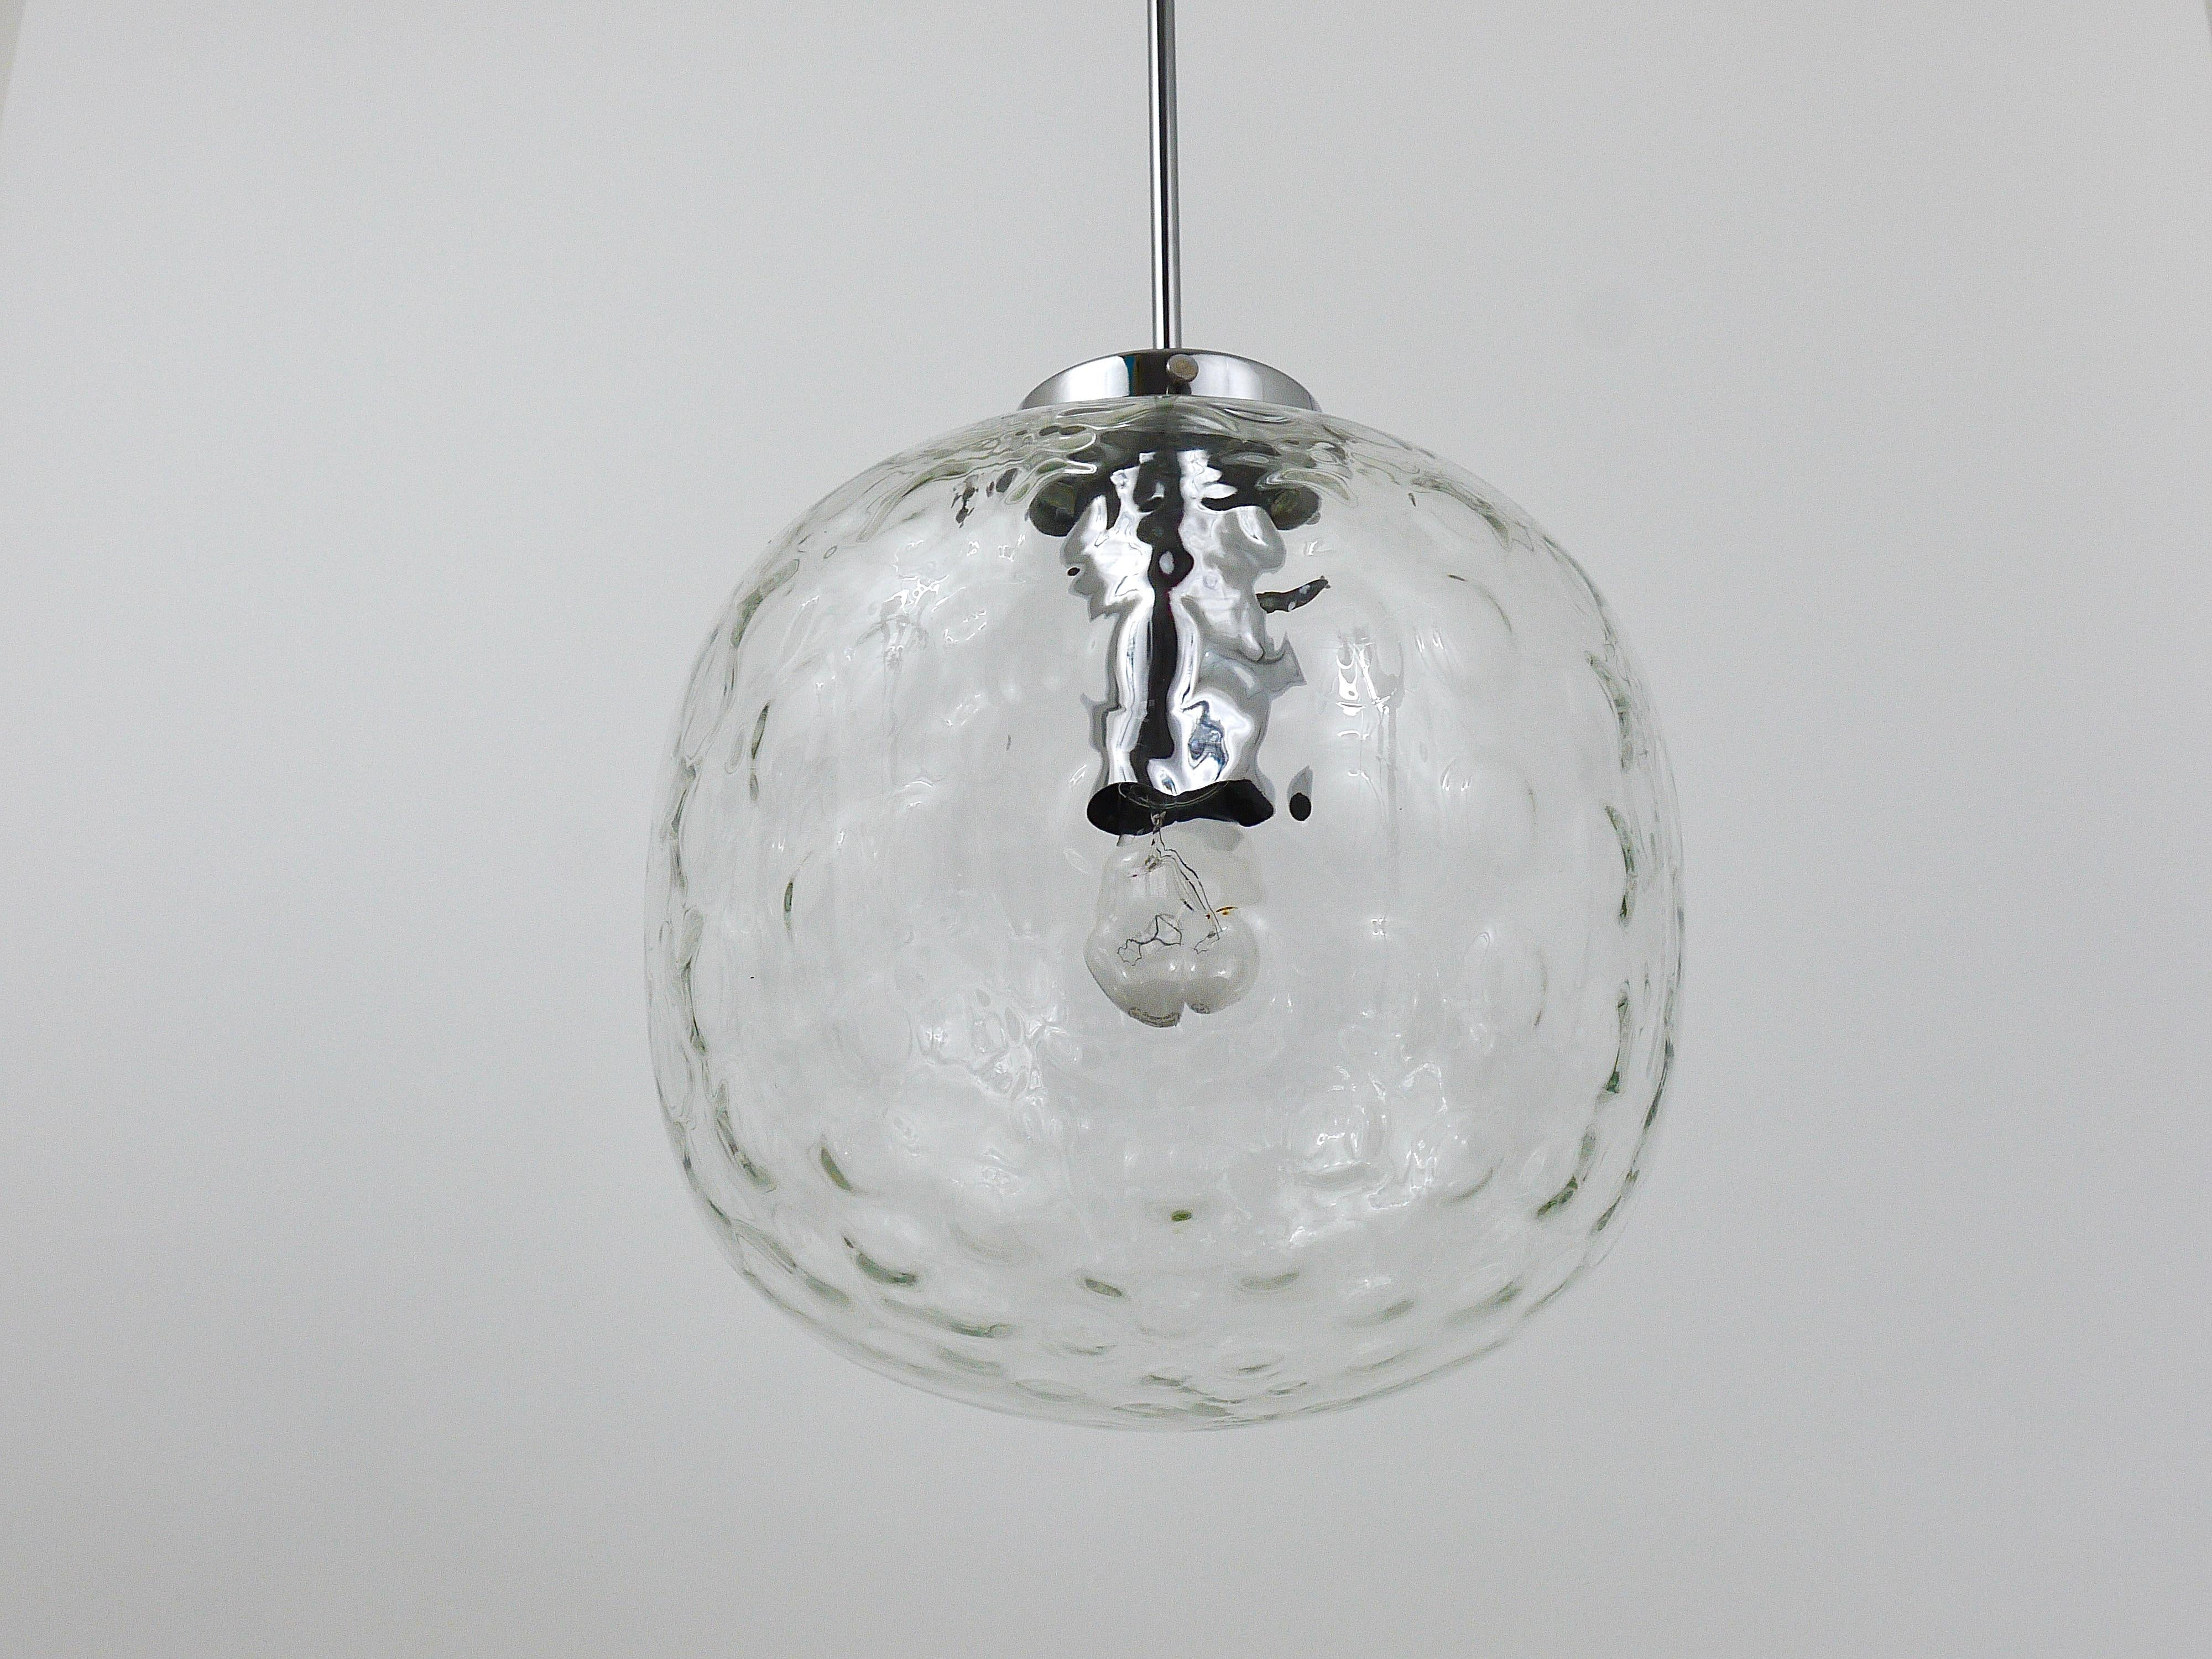 Large Bubble Melting Glass and Chrome Globe Pendant Lamp, Germany, 1970s For Sale 1